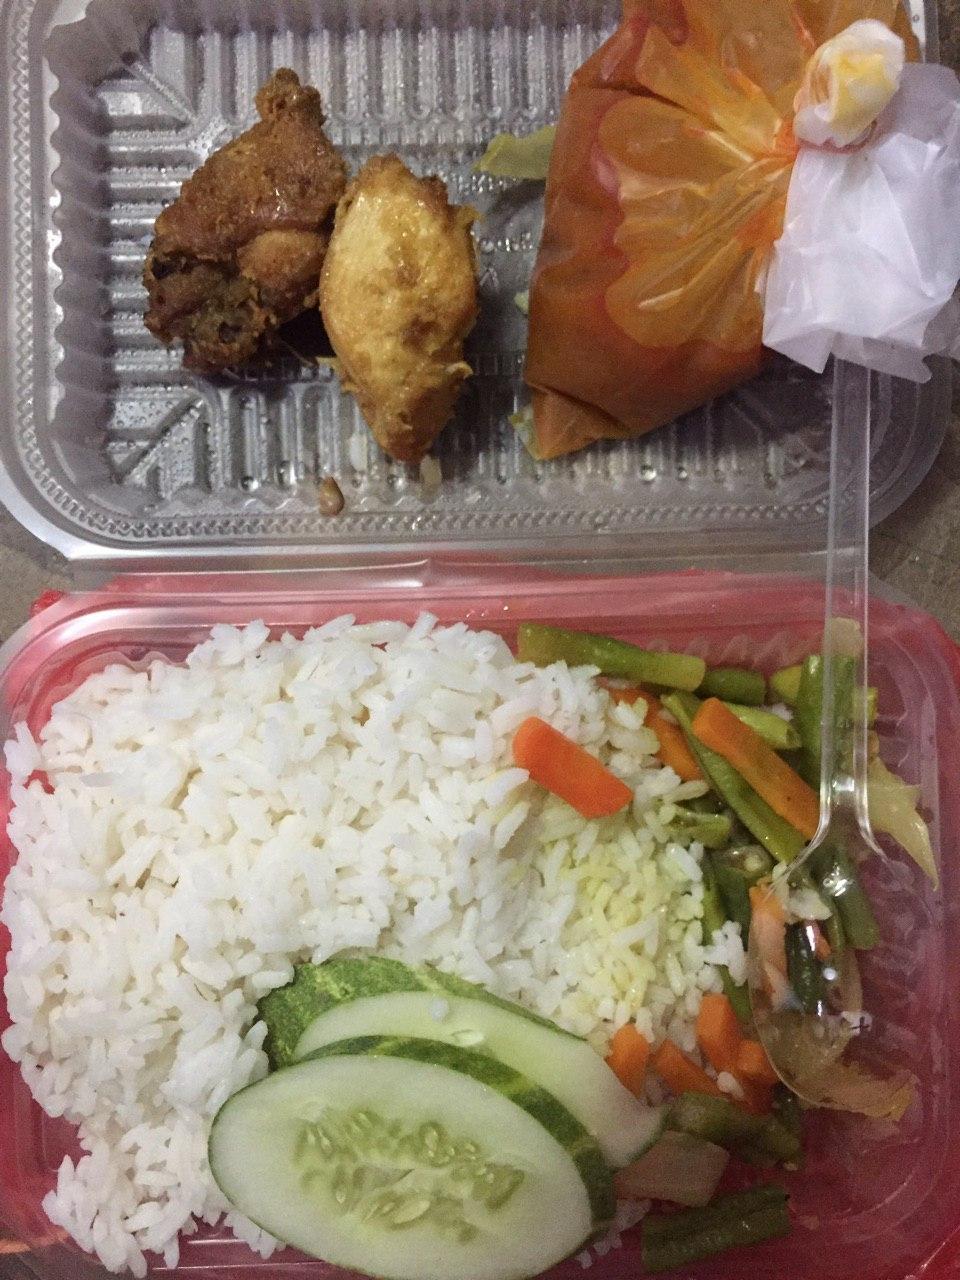 Malaysian University Student Complains About Quality of Free Food Given, Netizens Outraged - WORLD OF BUZZ 9